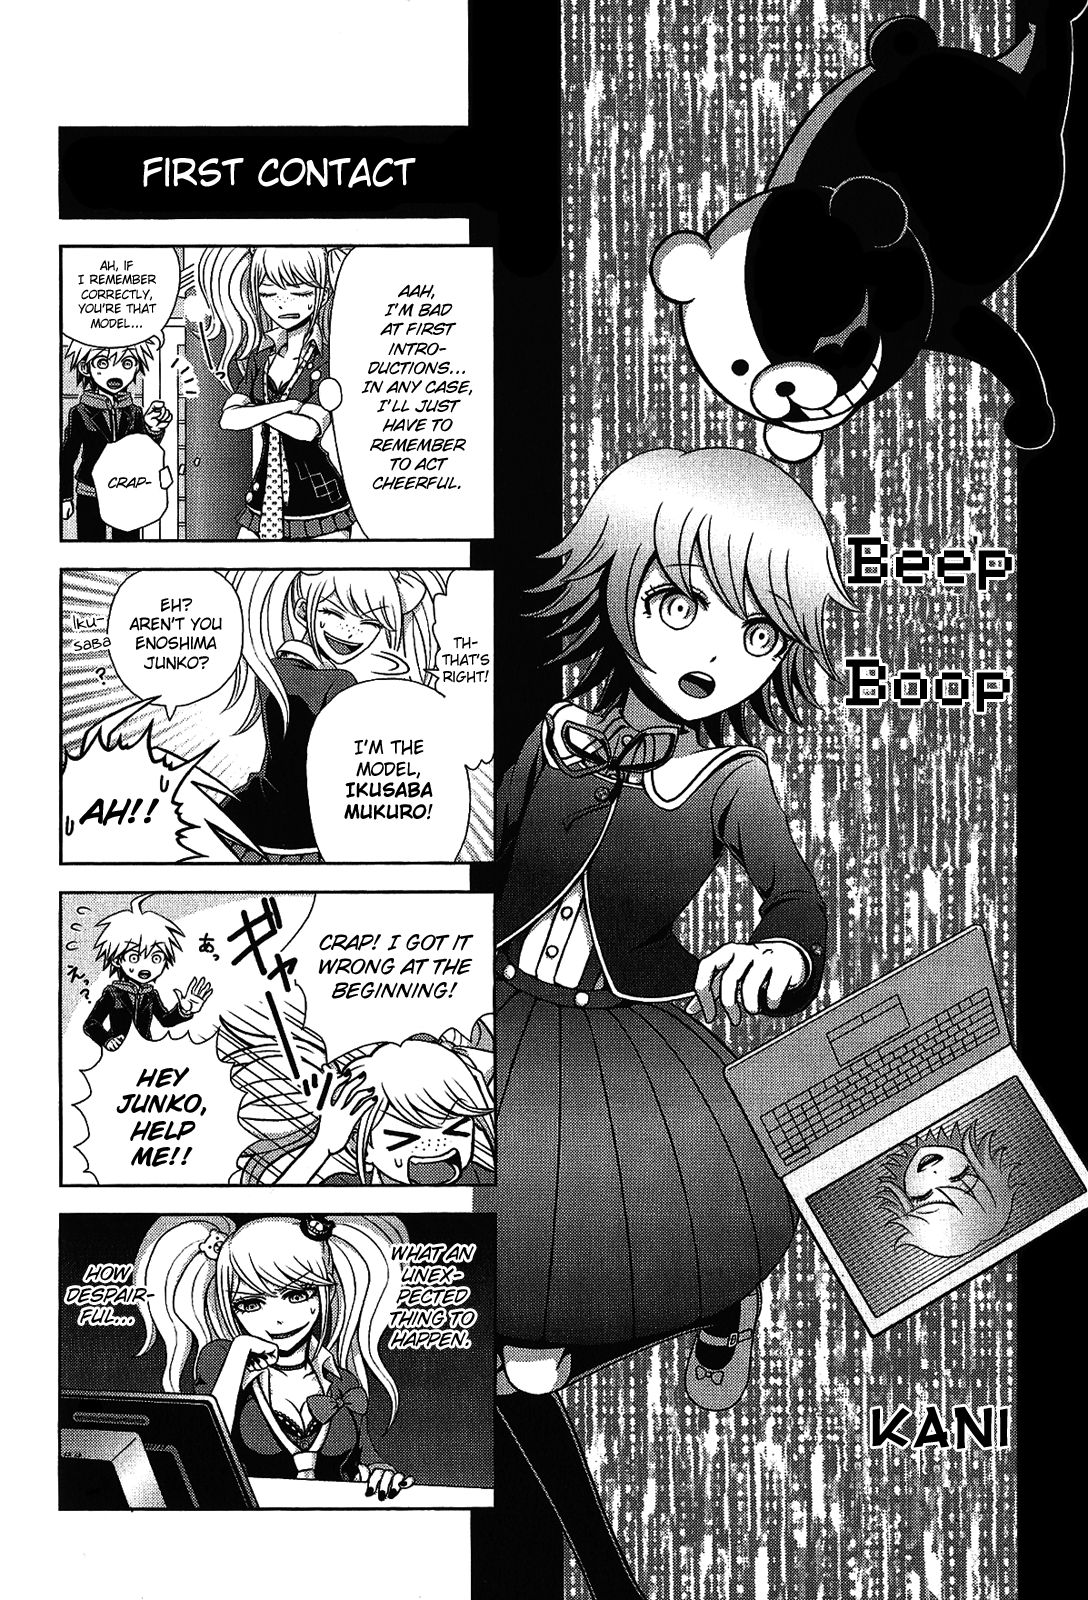 Danganronpa - The Academy of Hope and the High School Students of Despair 4-koma Kings - chapter 3 - #1